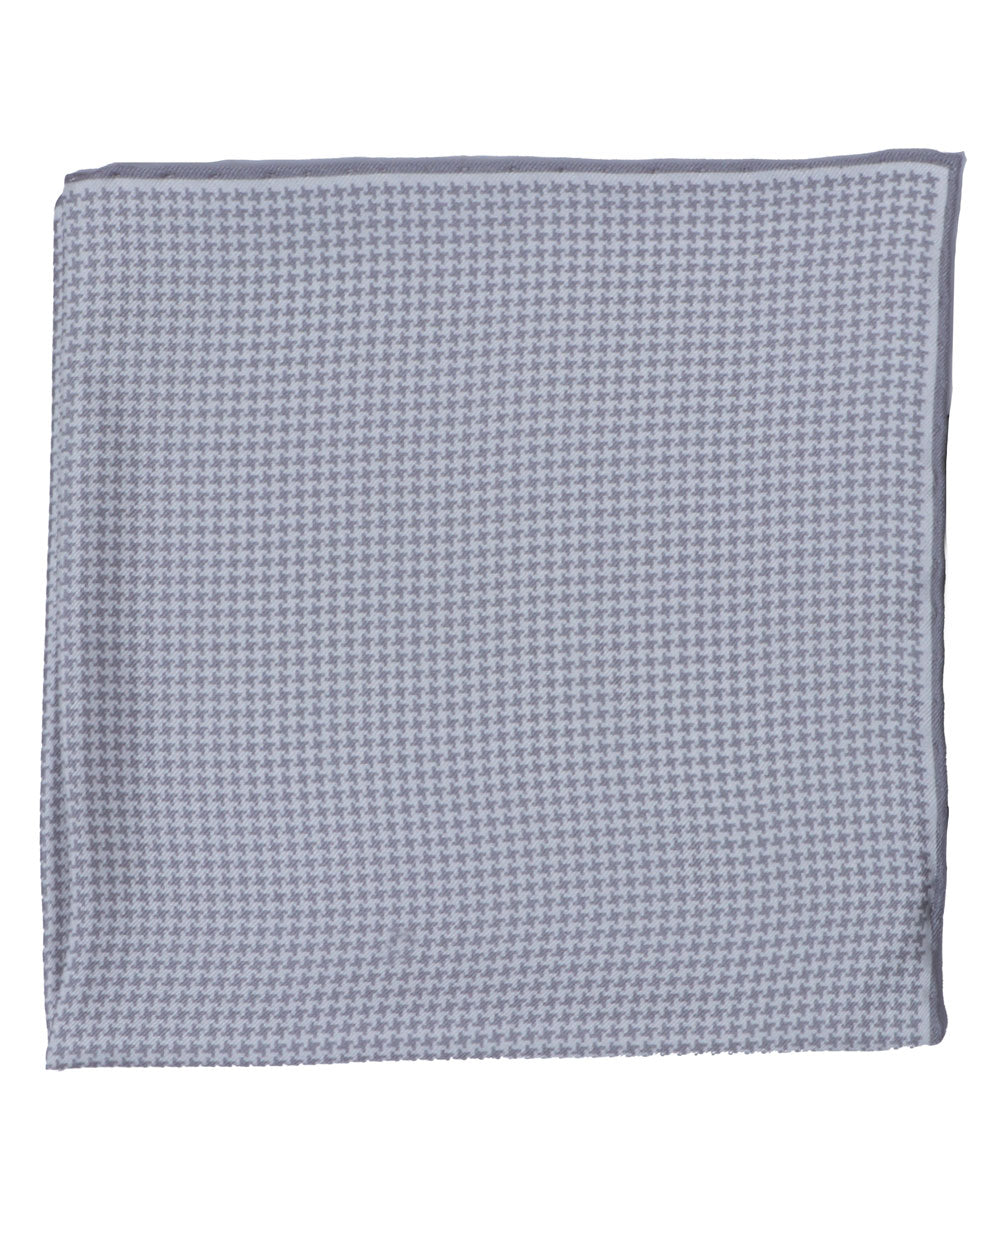 Grey and White Silk Pocket Square